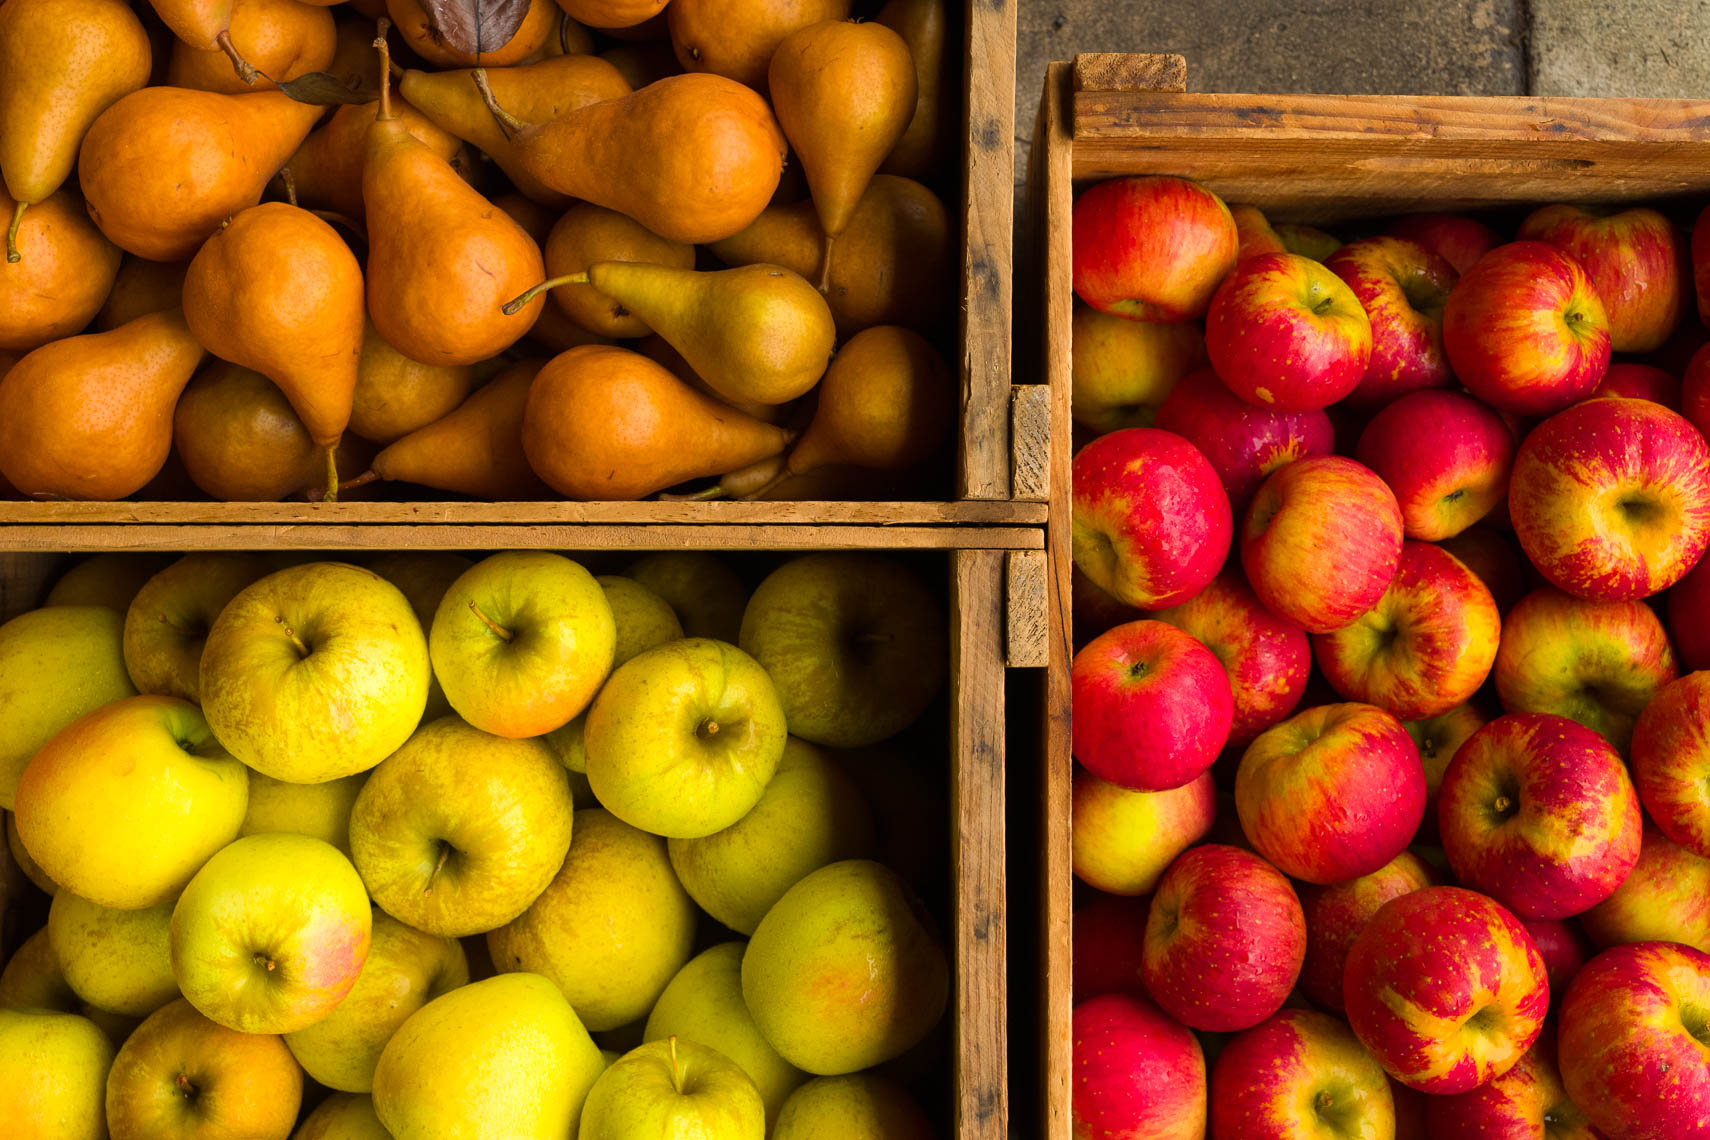 Solebury Orchard Apples & Pears - Philadelphia Food Photography